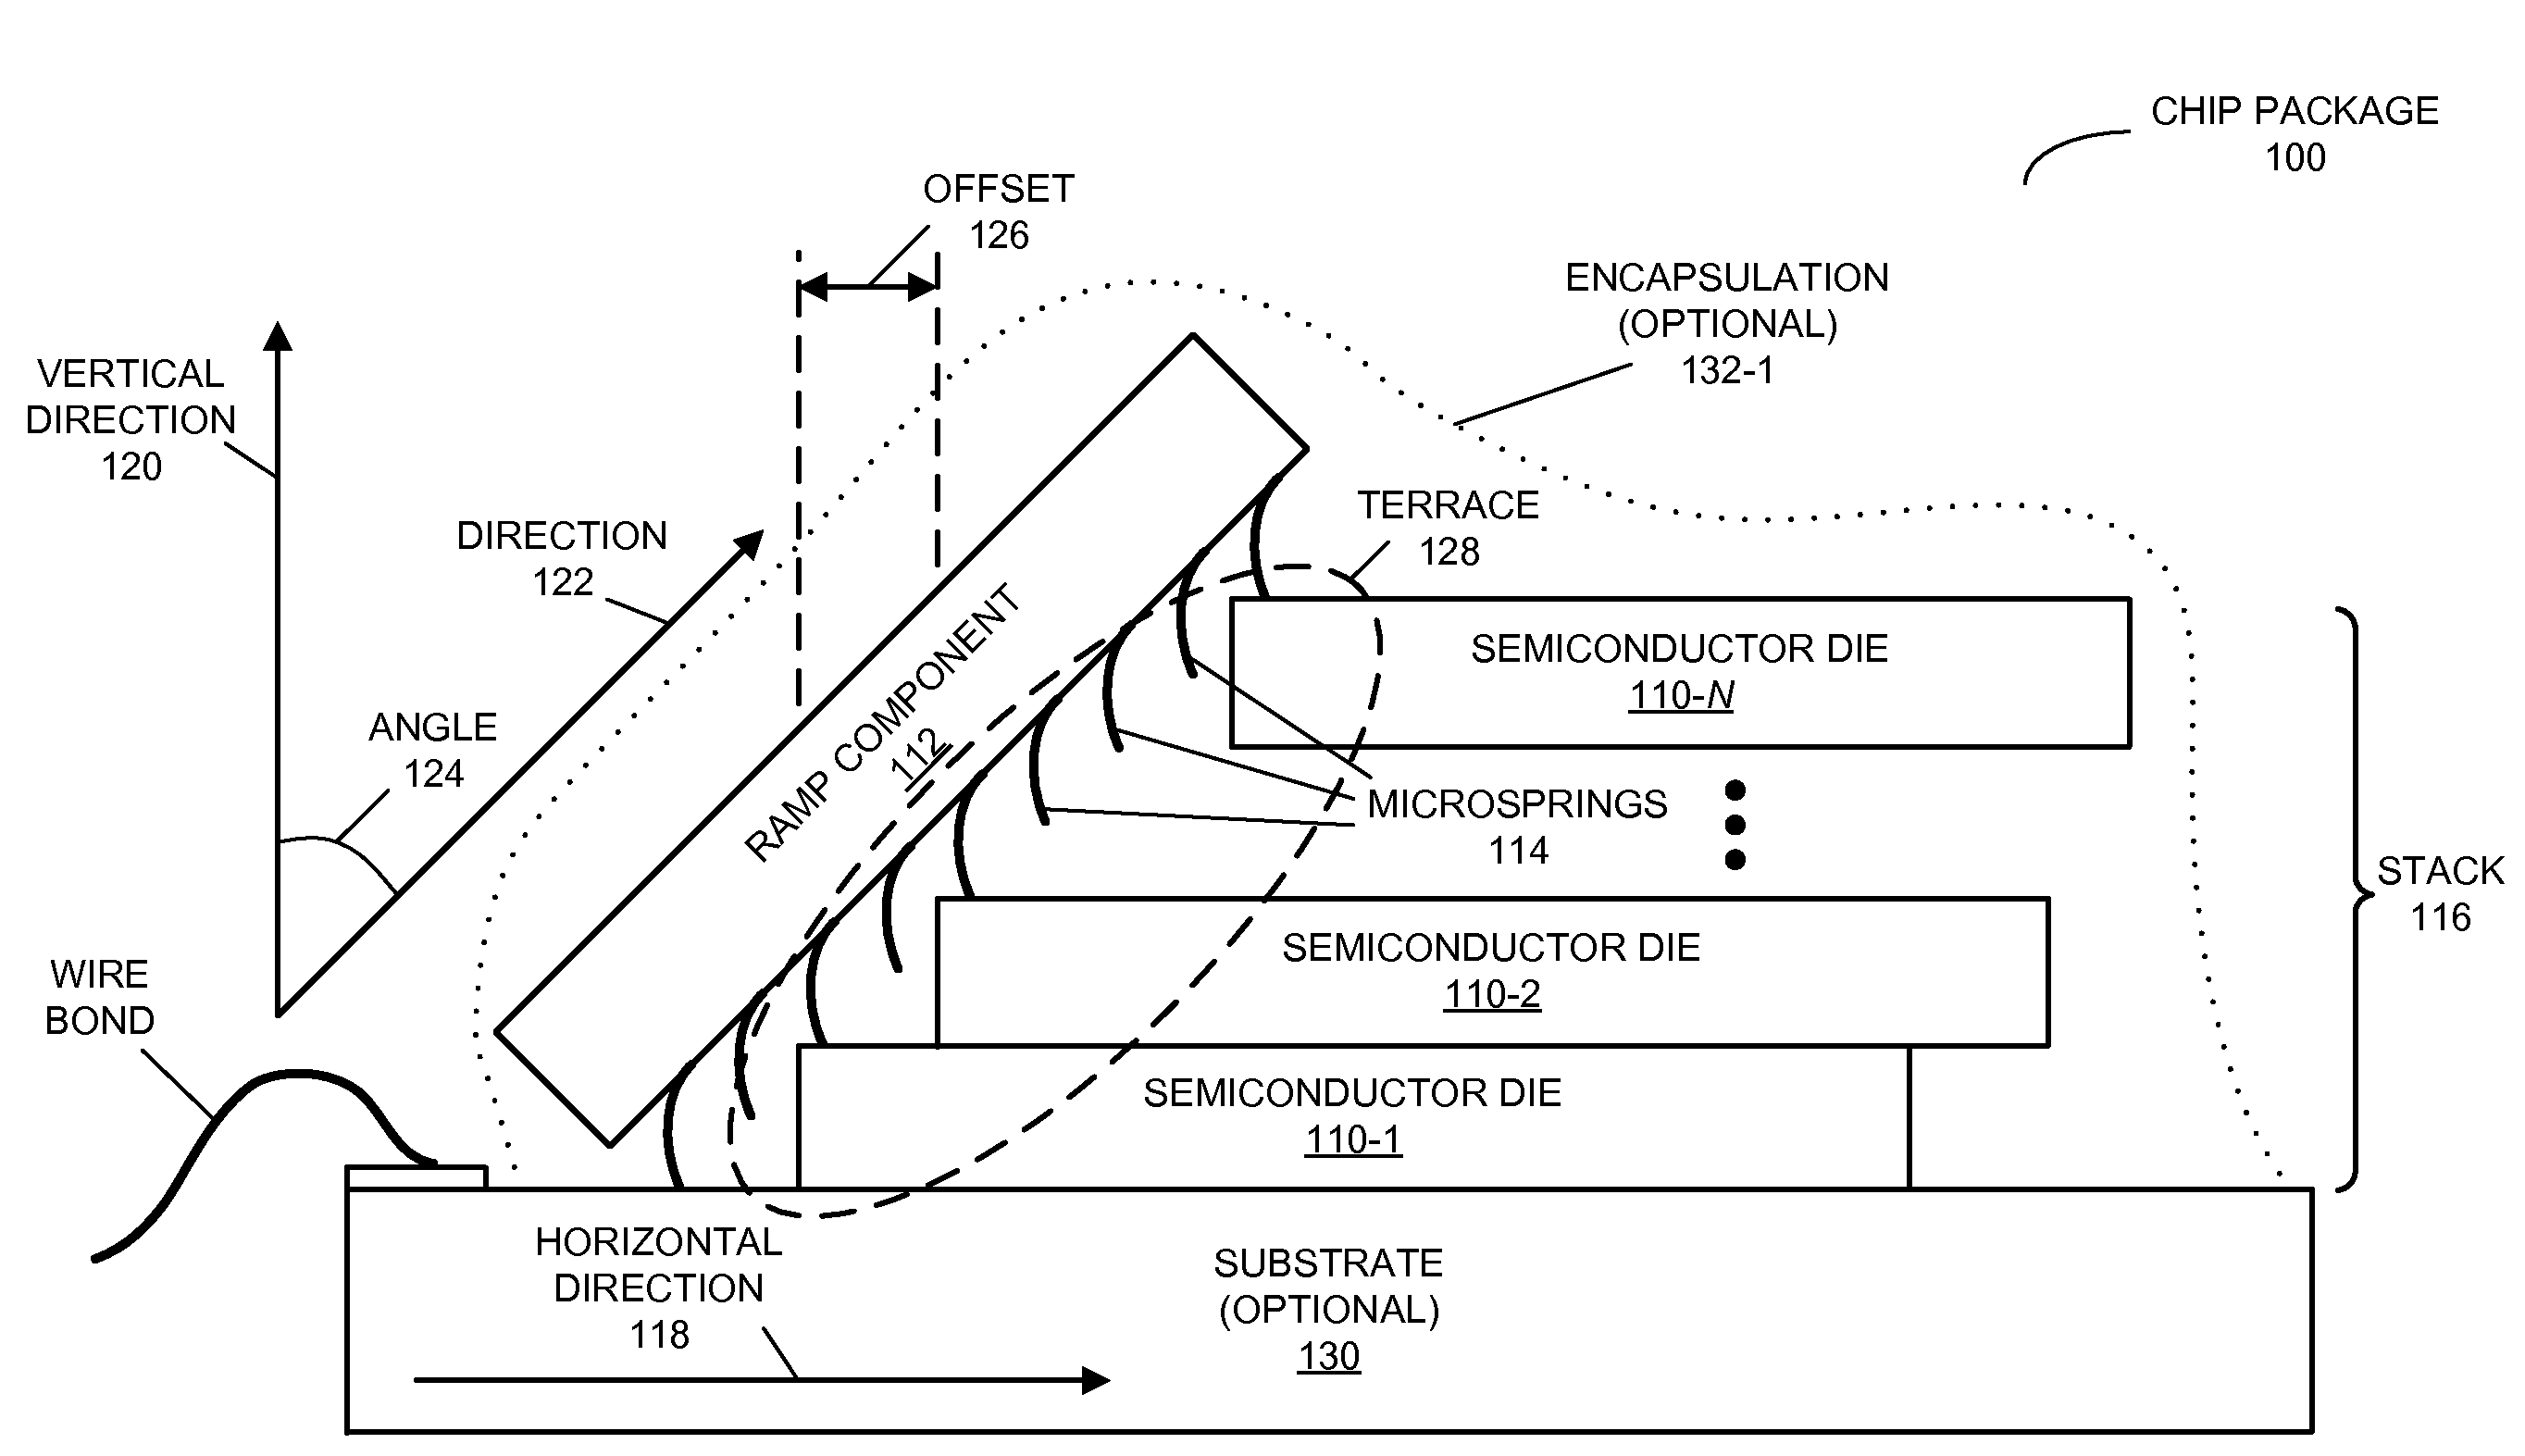 High-bandwidth ramp-stack chip package